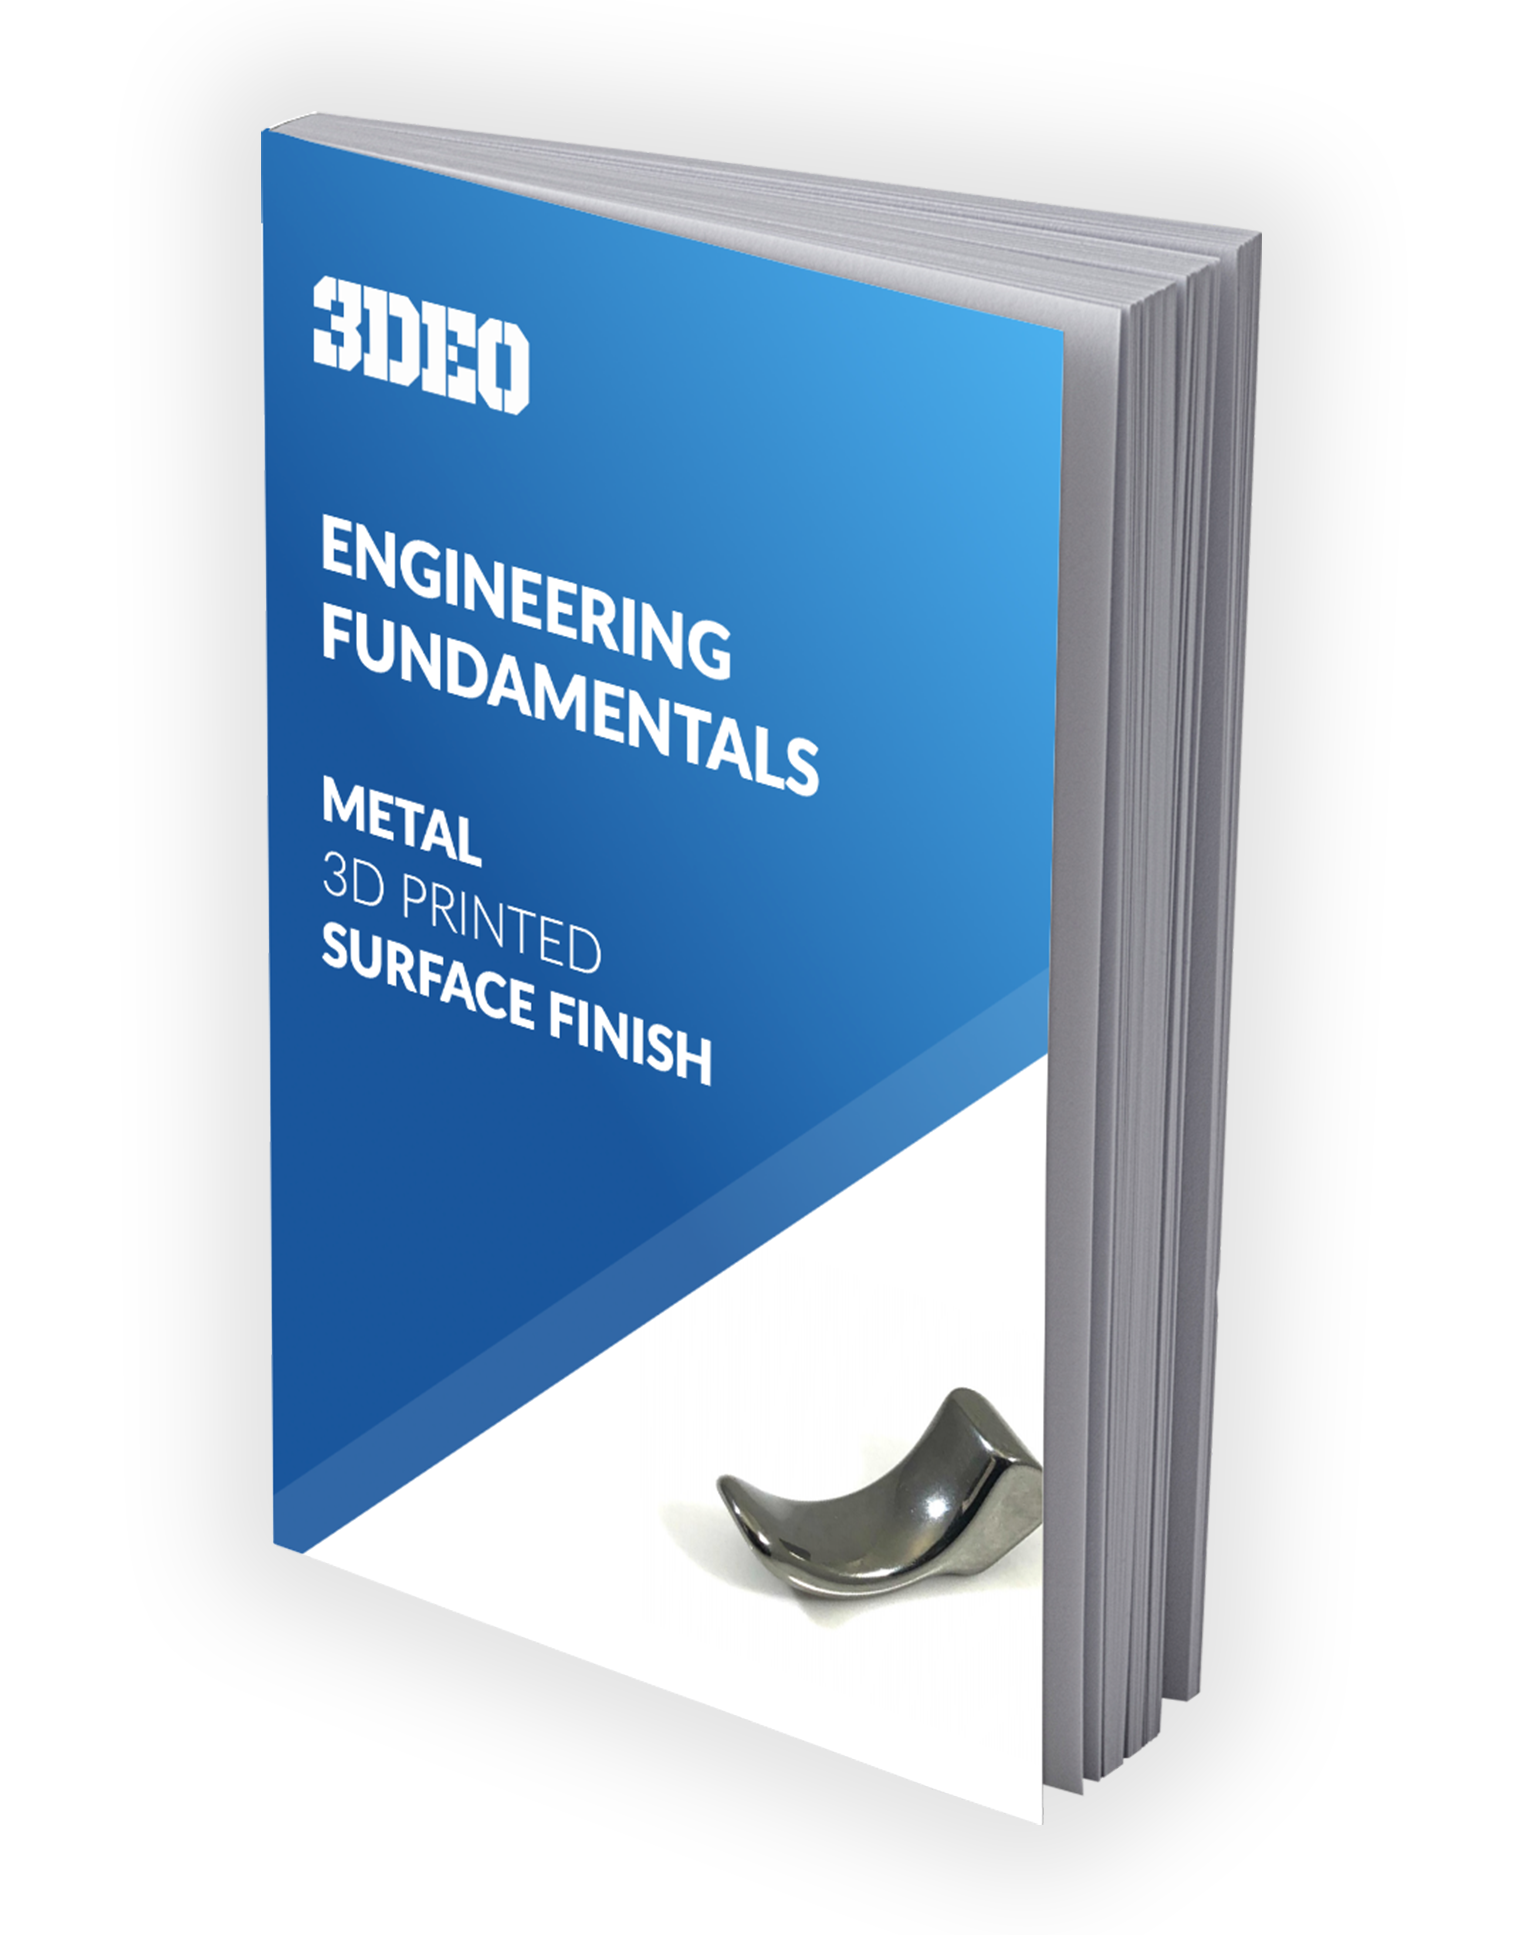 A textbook titled "engineering fundamentals: metal 3d printed surface finish" by 3deo, displayed at an angle, featuring a metallic object on the cover.